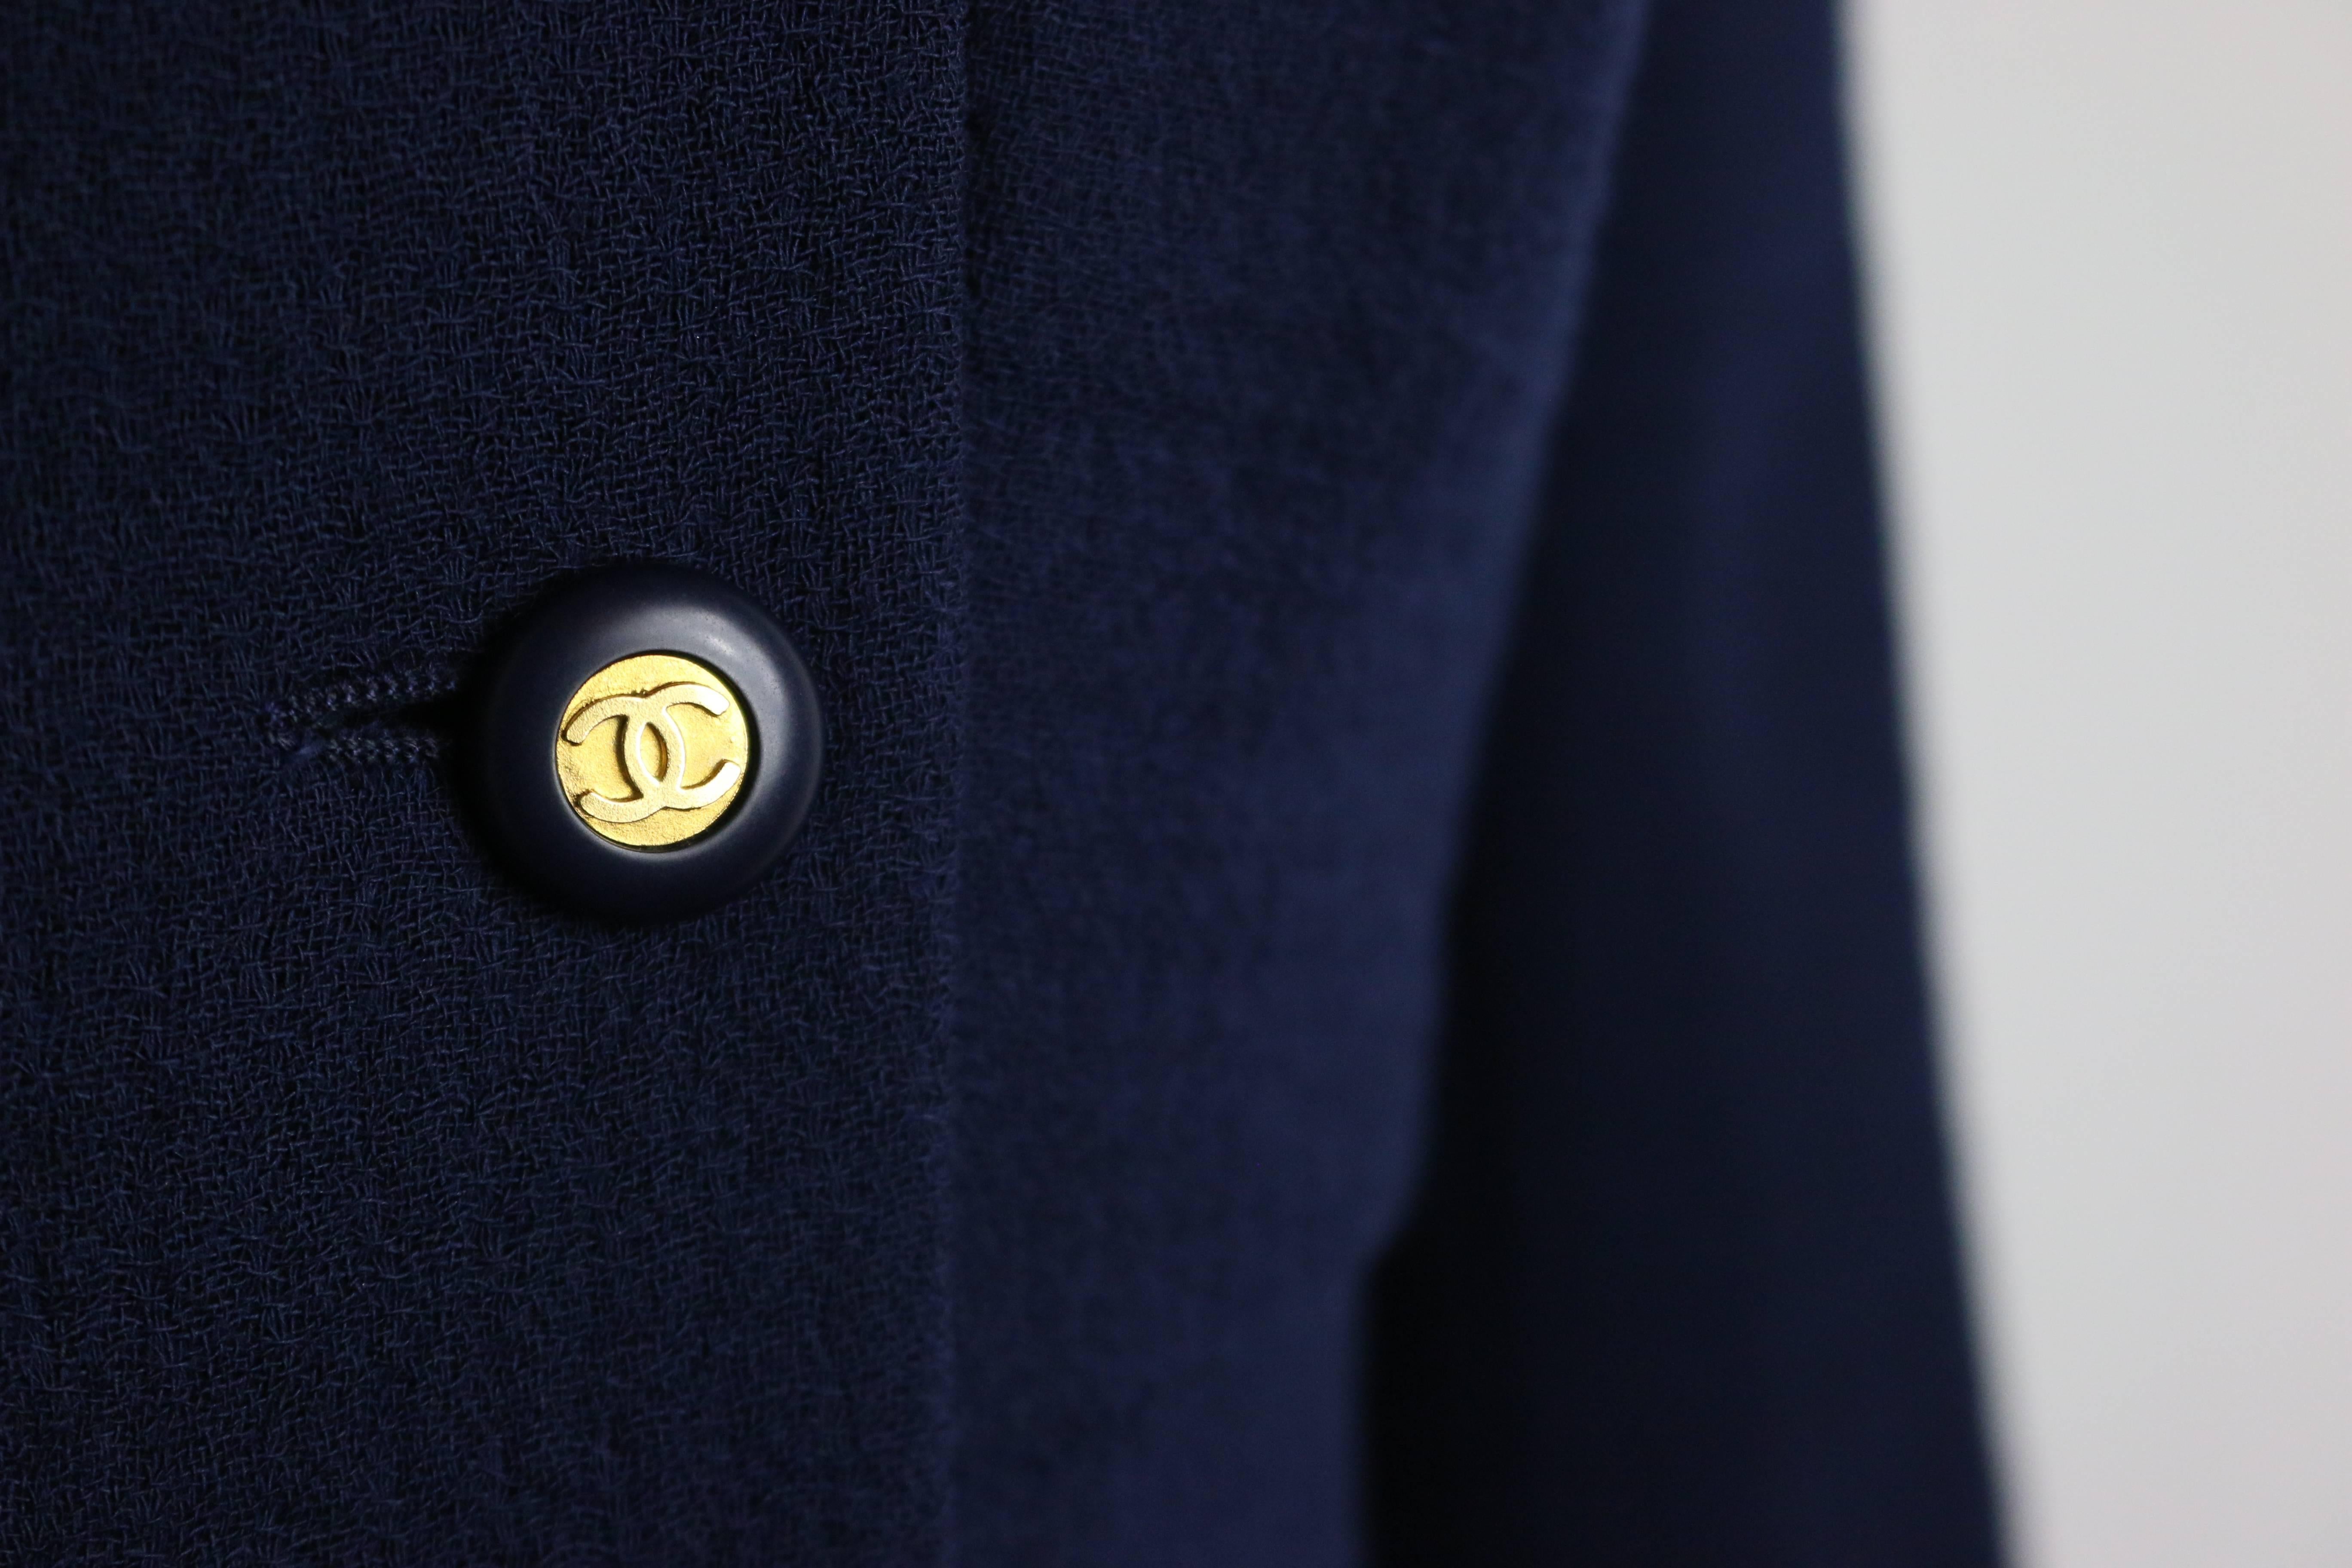 - Chanel dark navy double breasted boucle wool jacket with a flare style bottom from 1994 collection. 

-  Featuring eight panel front gold "CC" logo buttons and three gold "CC" logo buttons on each cuff. 

- Size 38. 

-